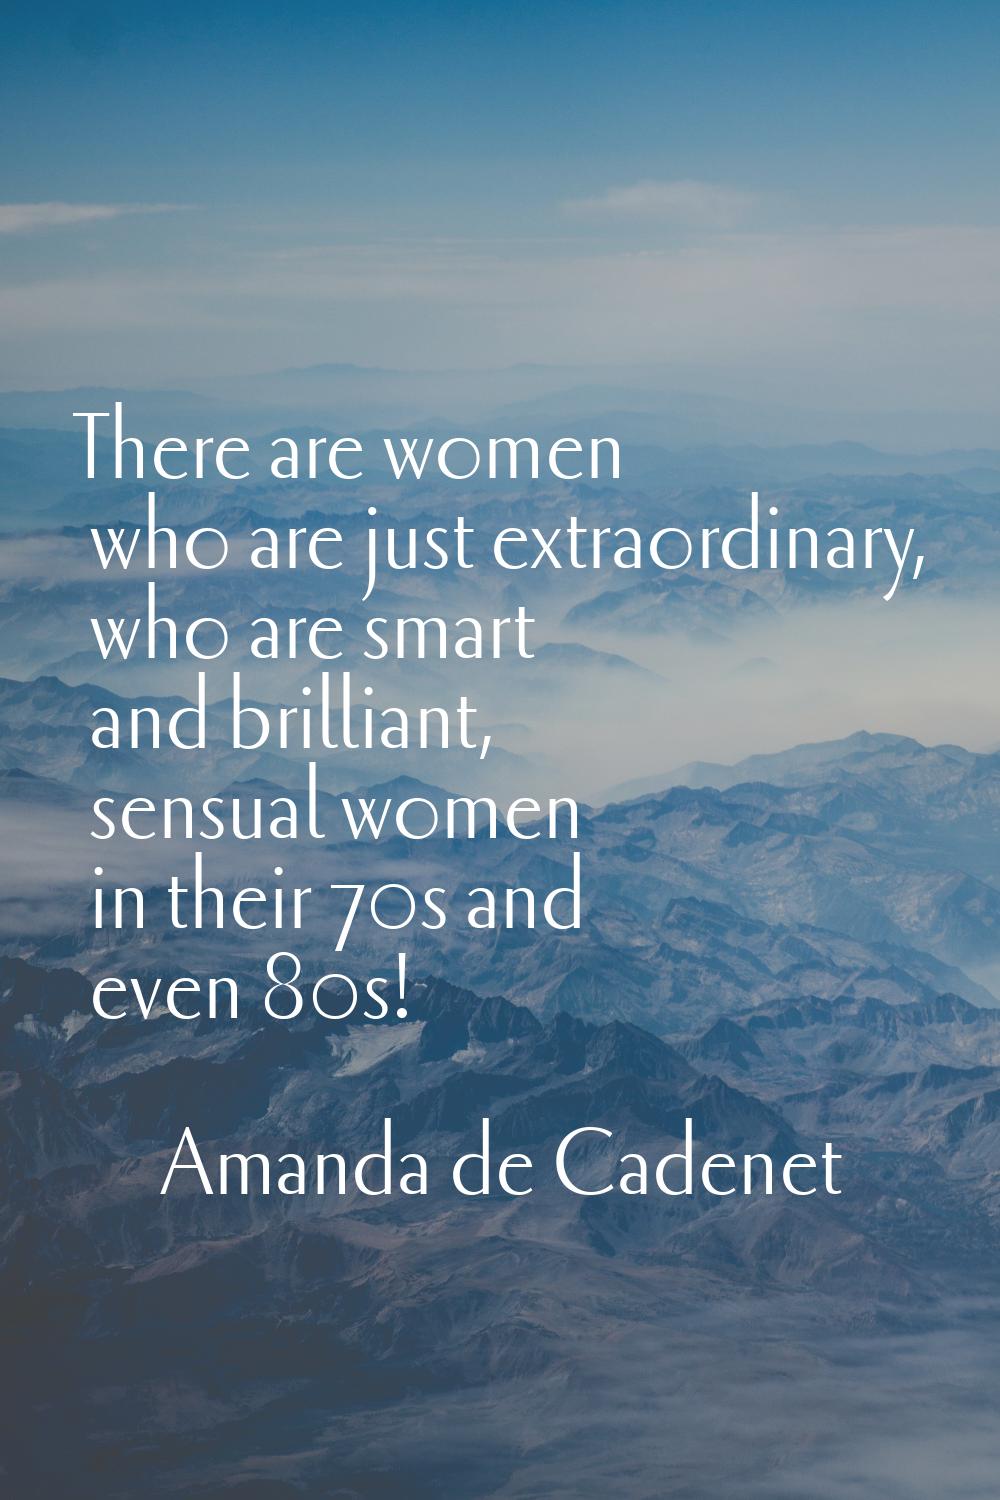 There are women who are just extraordinary, who are smart and brilliant, sensual women in their 70s